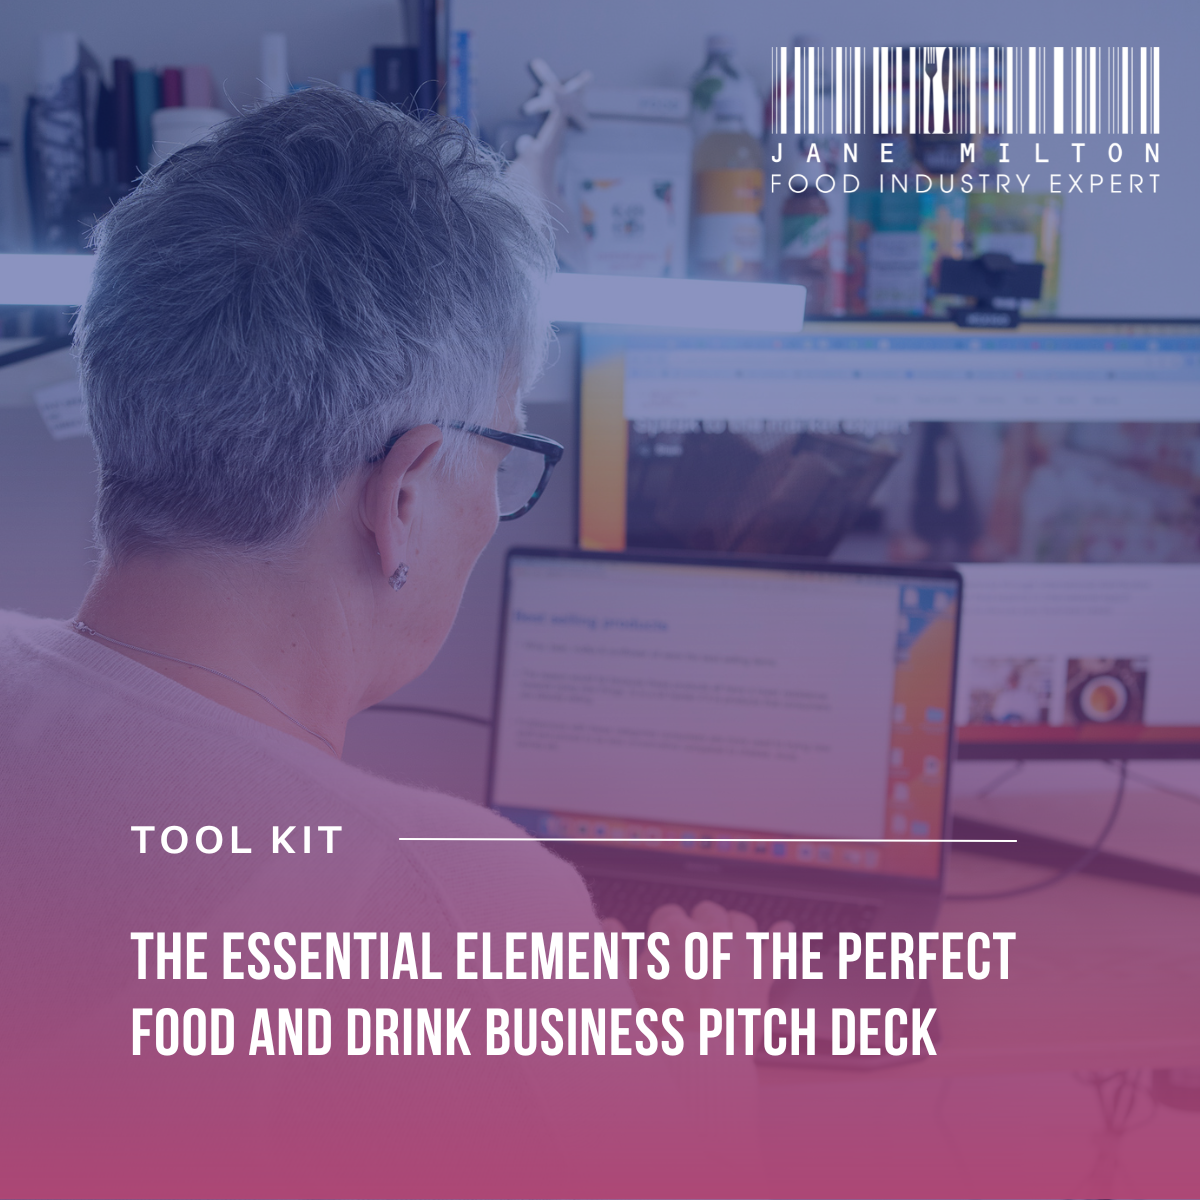 The essential elements of the perfect food and drink business pitch deck by Jane Milton